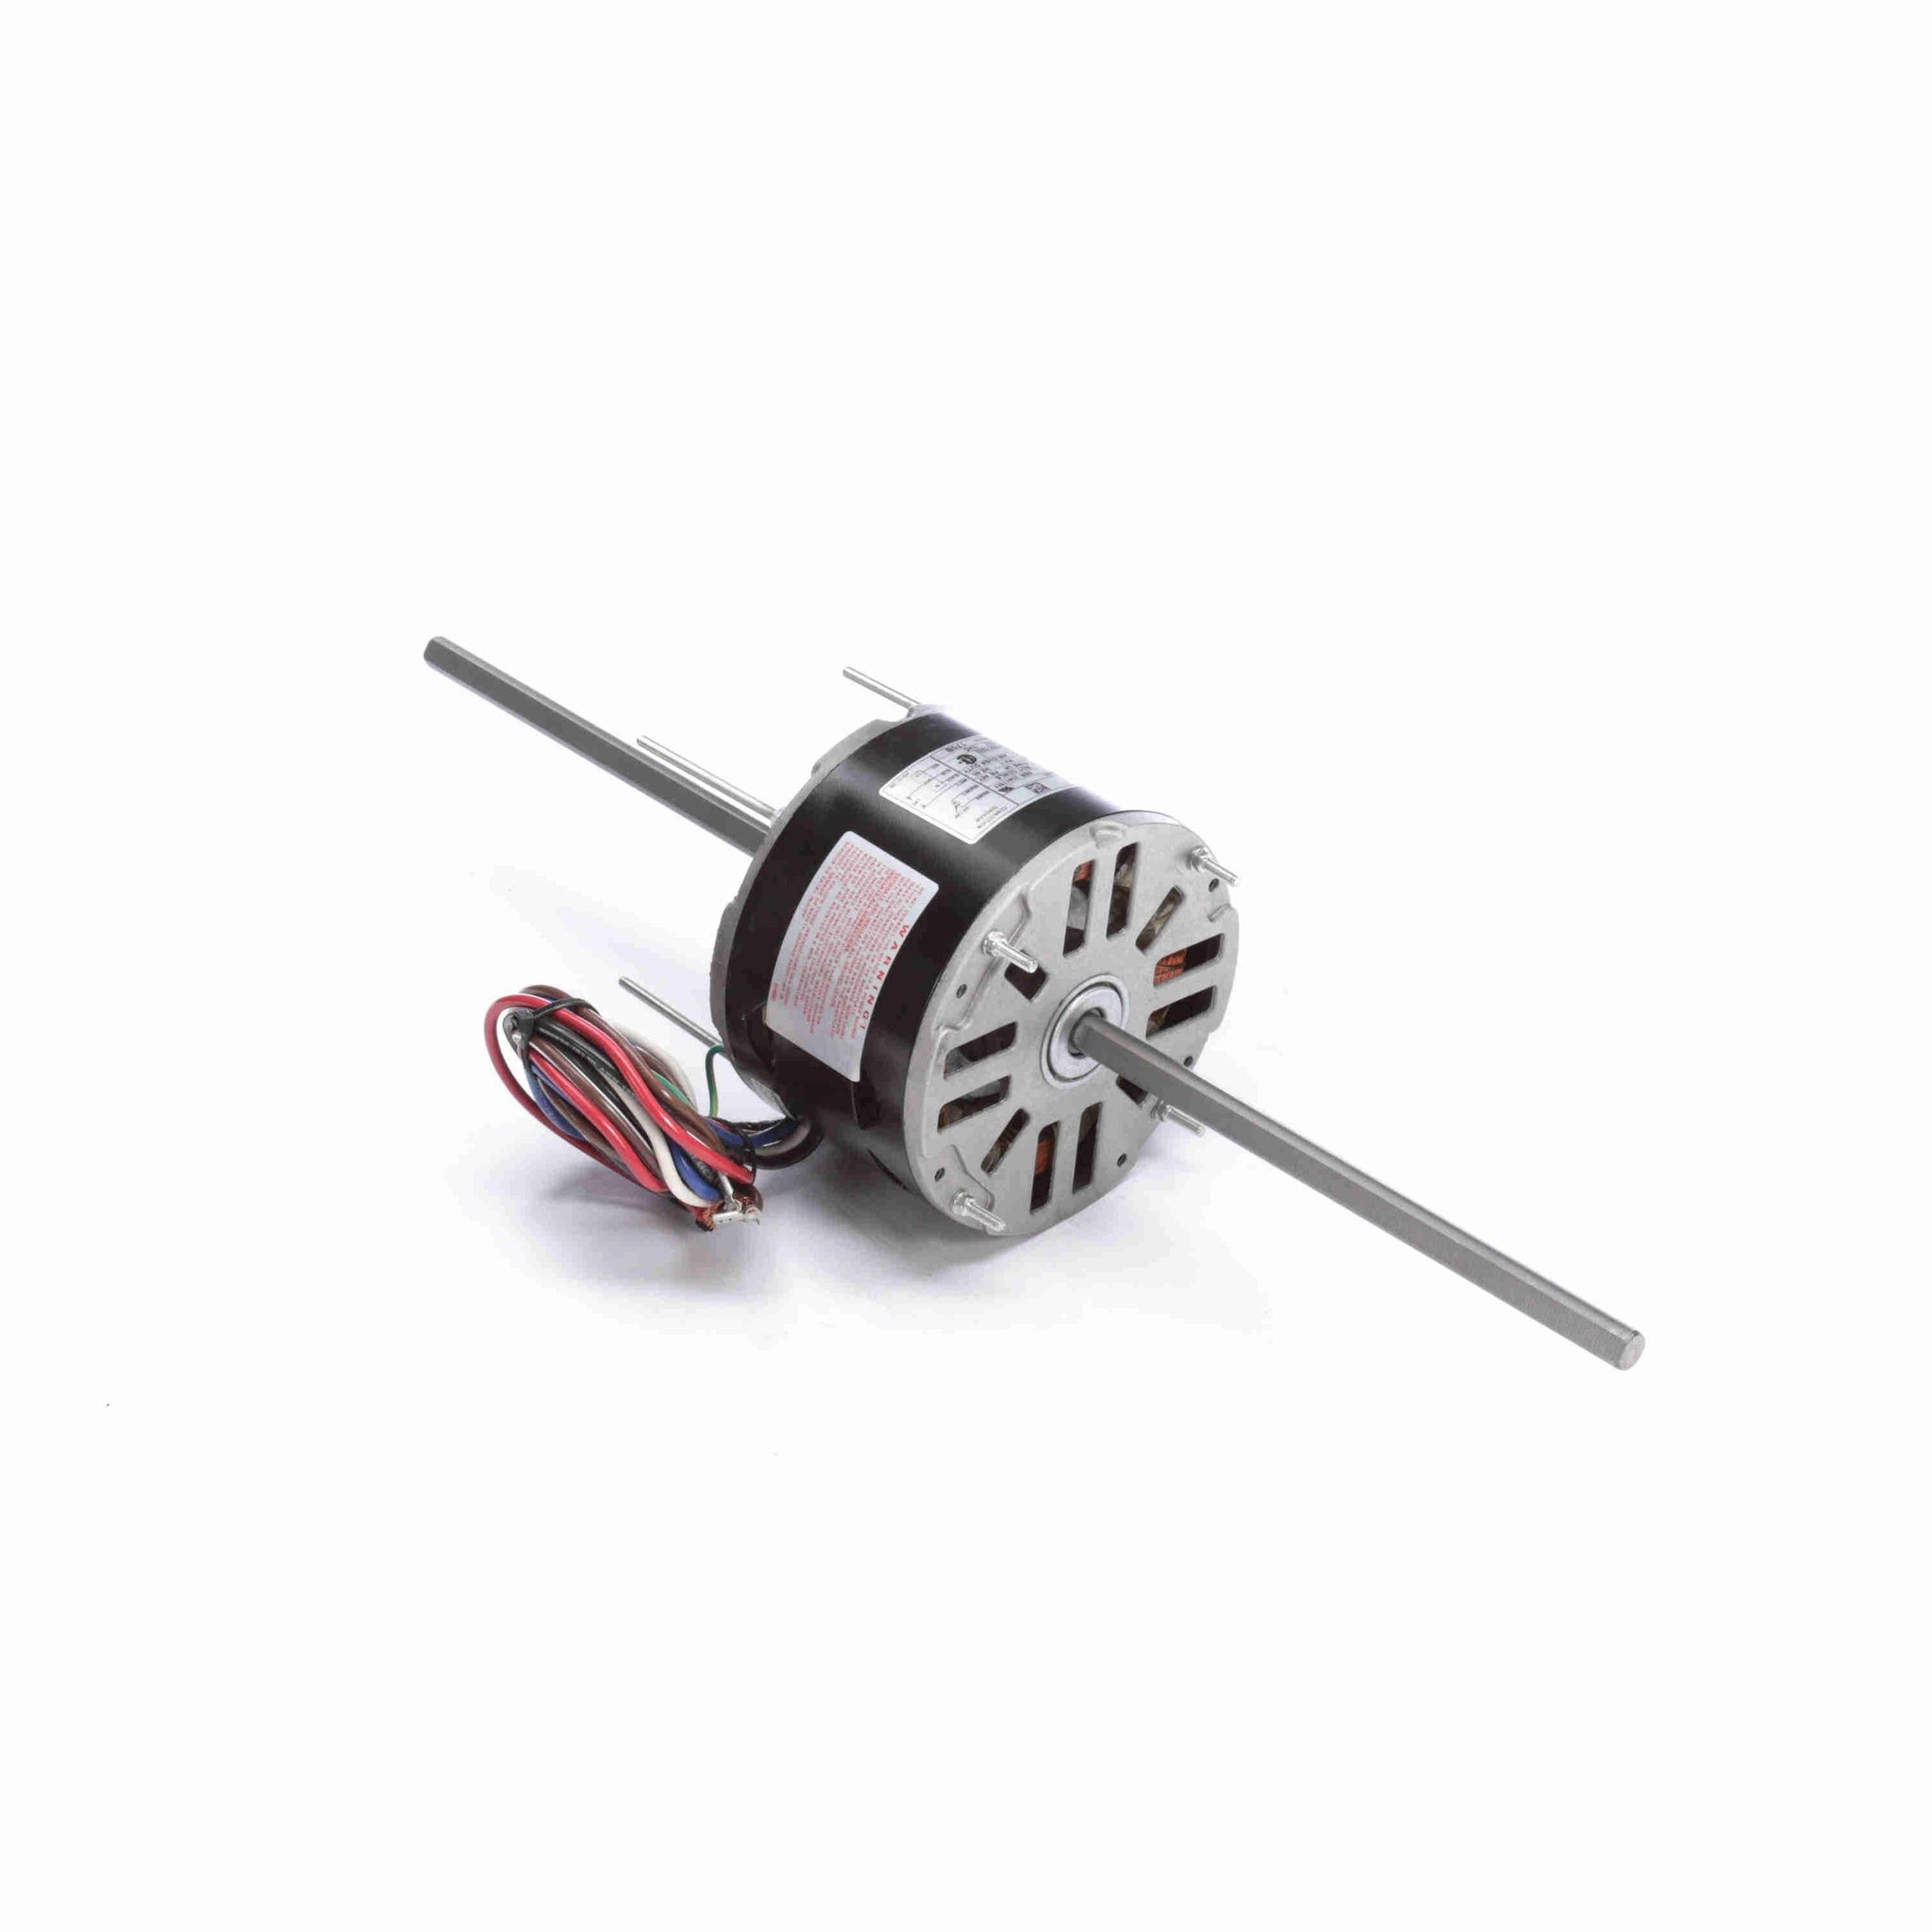 170B -  1/6-44470-1/15 HP Fan Coil / Room Air Conditioner Motor, 1625 RPM, 3 Speed, 208-230 Volts, 48 Frame, Semi Enclosed - Hardware & Moreee